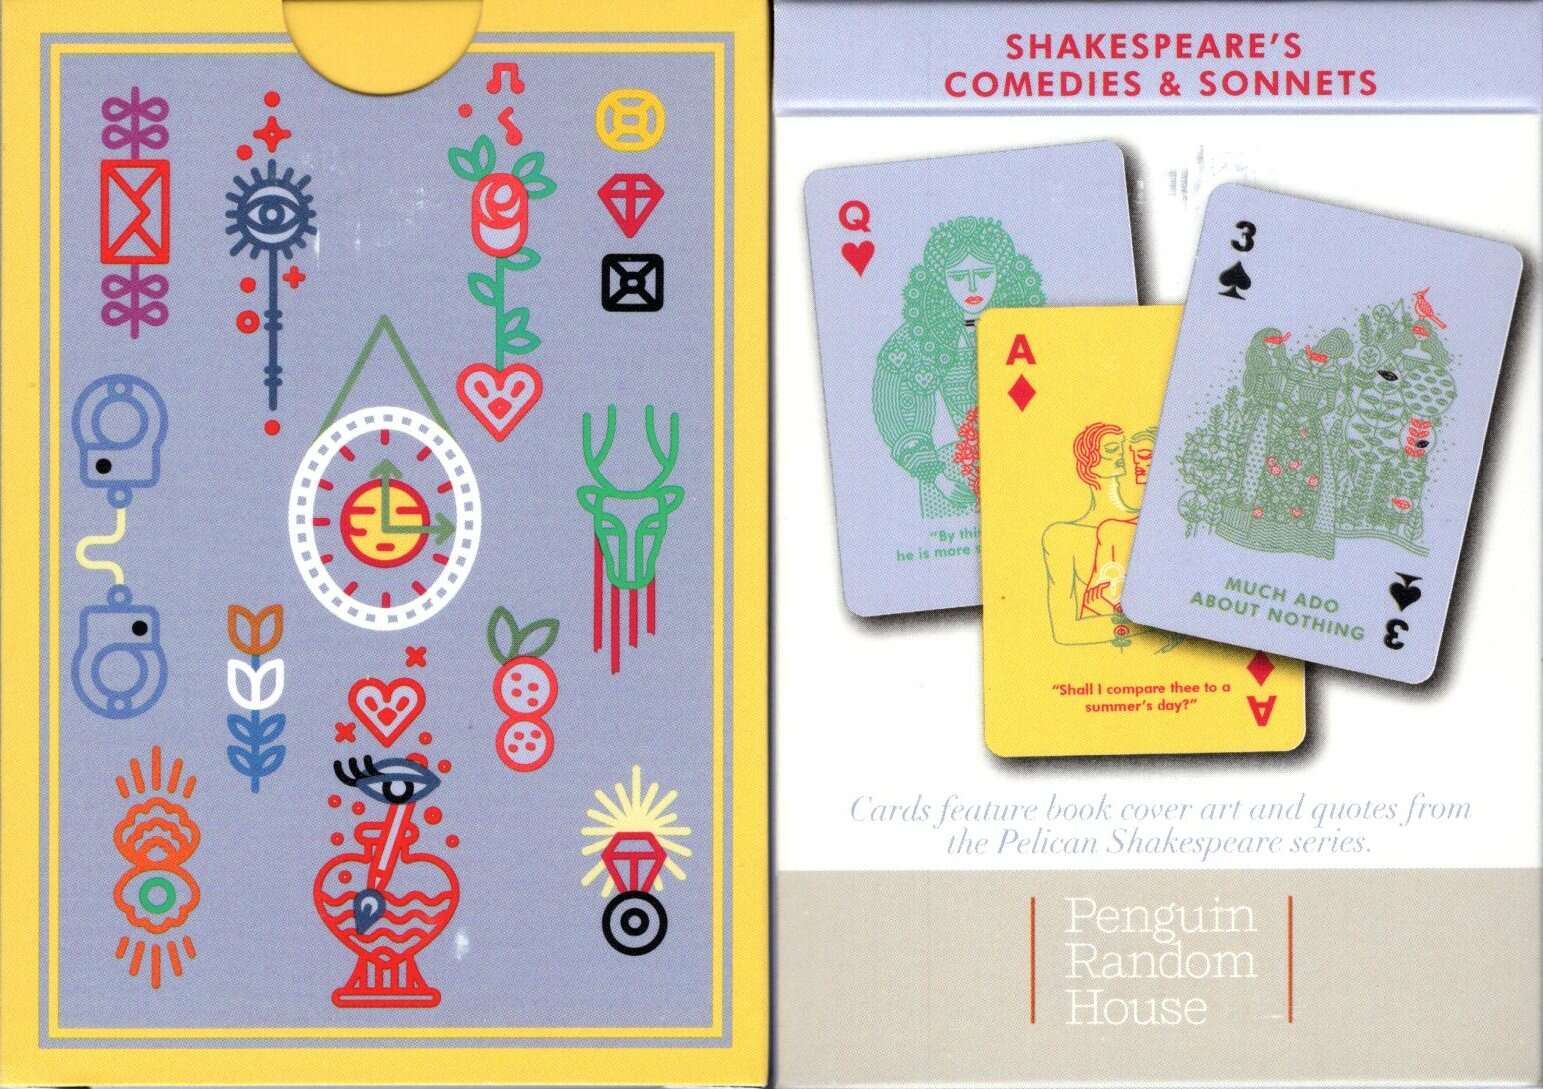 PlayingCardDecks.com-Shakespeare's Comedies & Sonnets Playing Cards NYPC